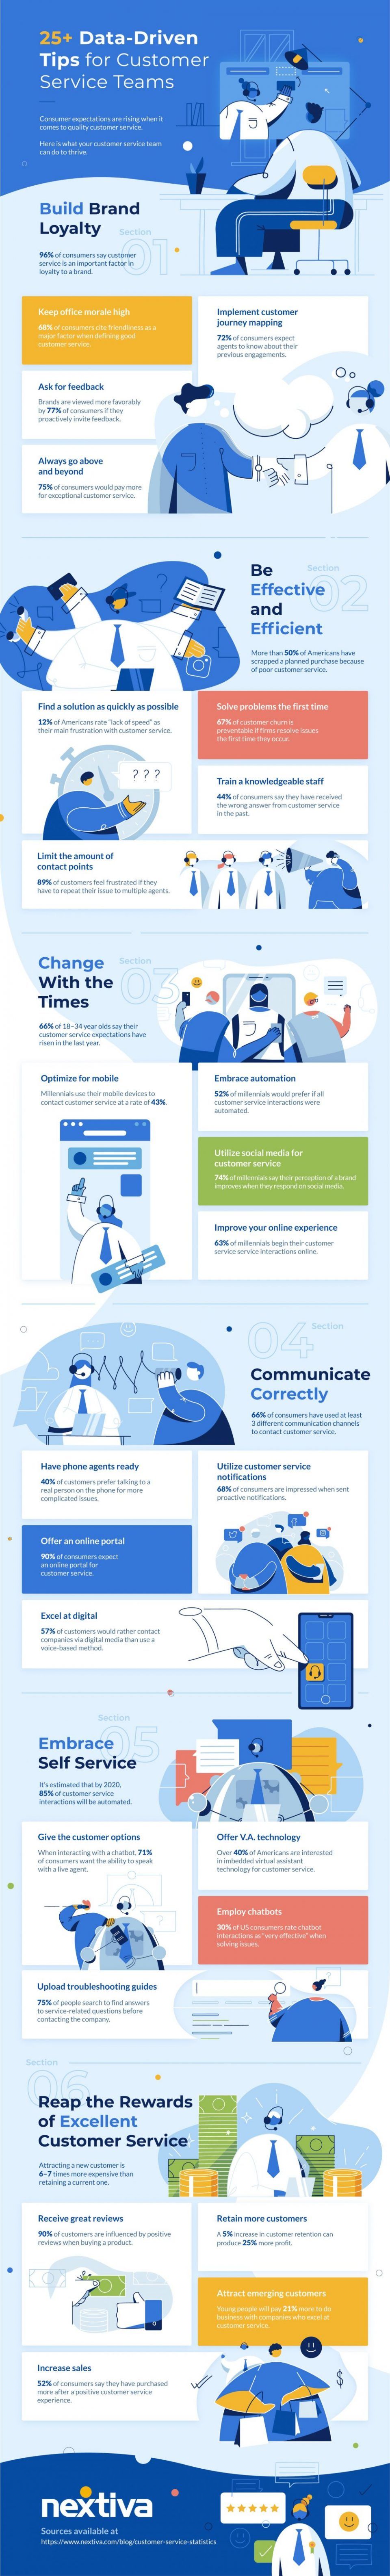 25+ Essential Data-Driven Customer Service Tips Infographic